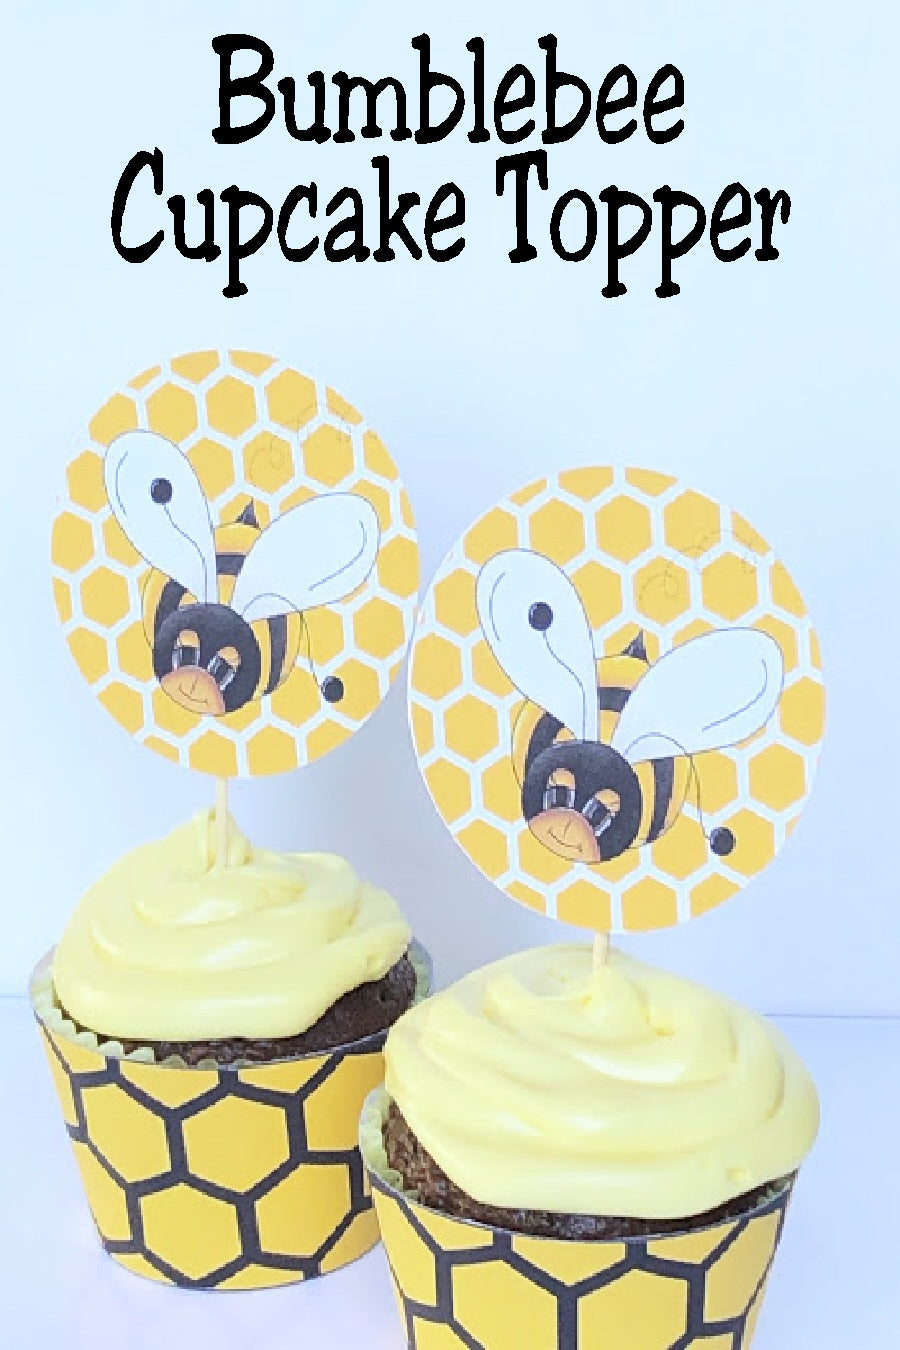 Bumble Bee Decorations Cupcake Toppers , 50 Pcs Indonesia